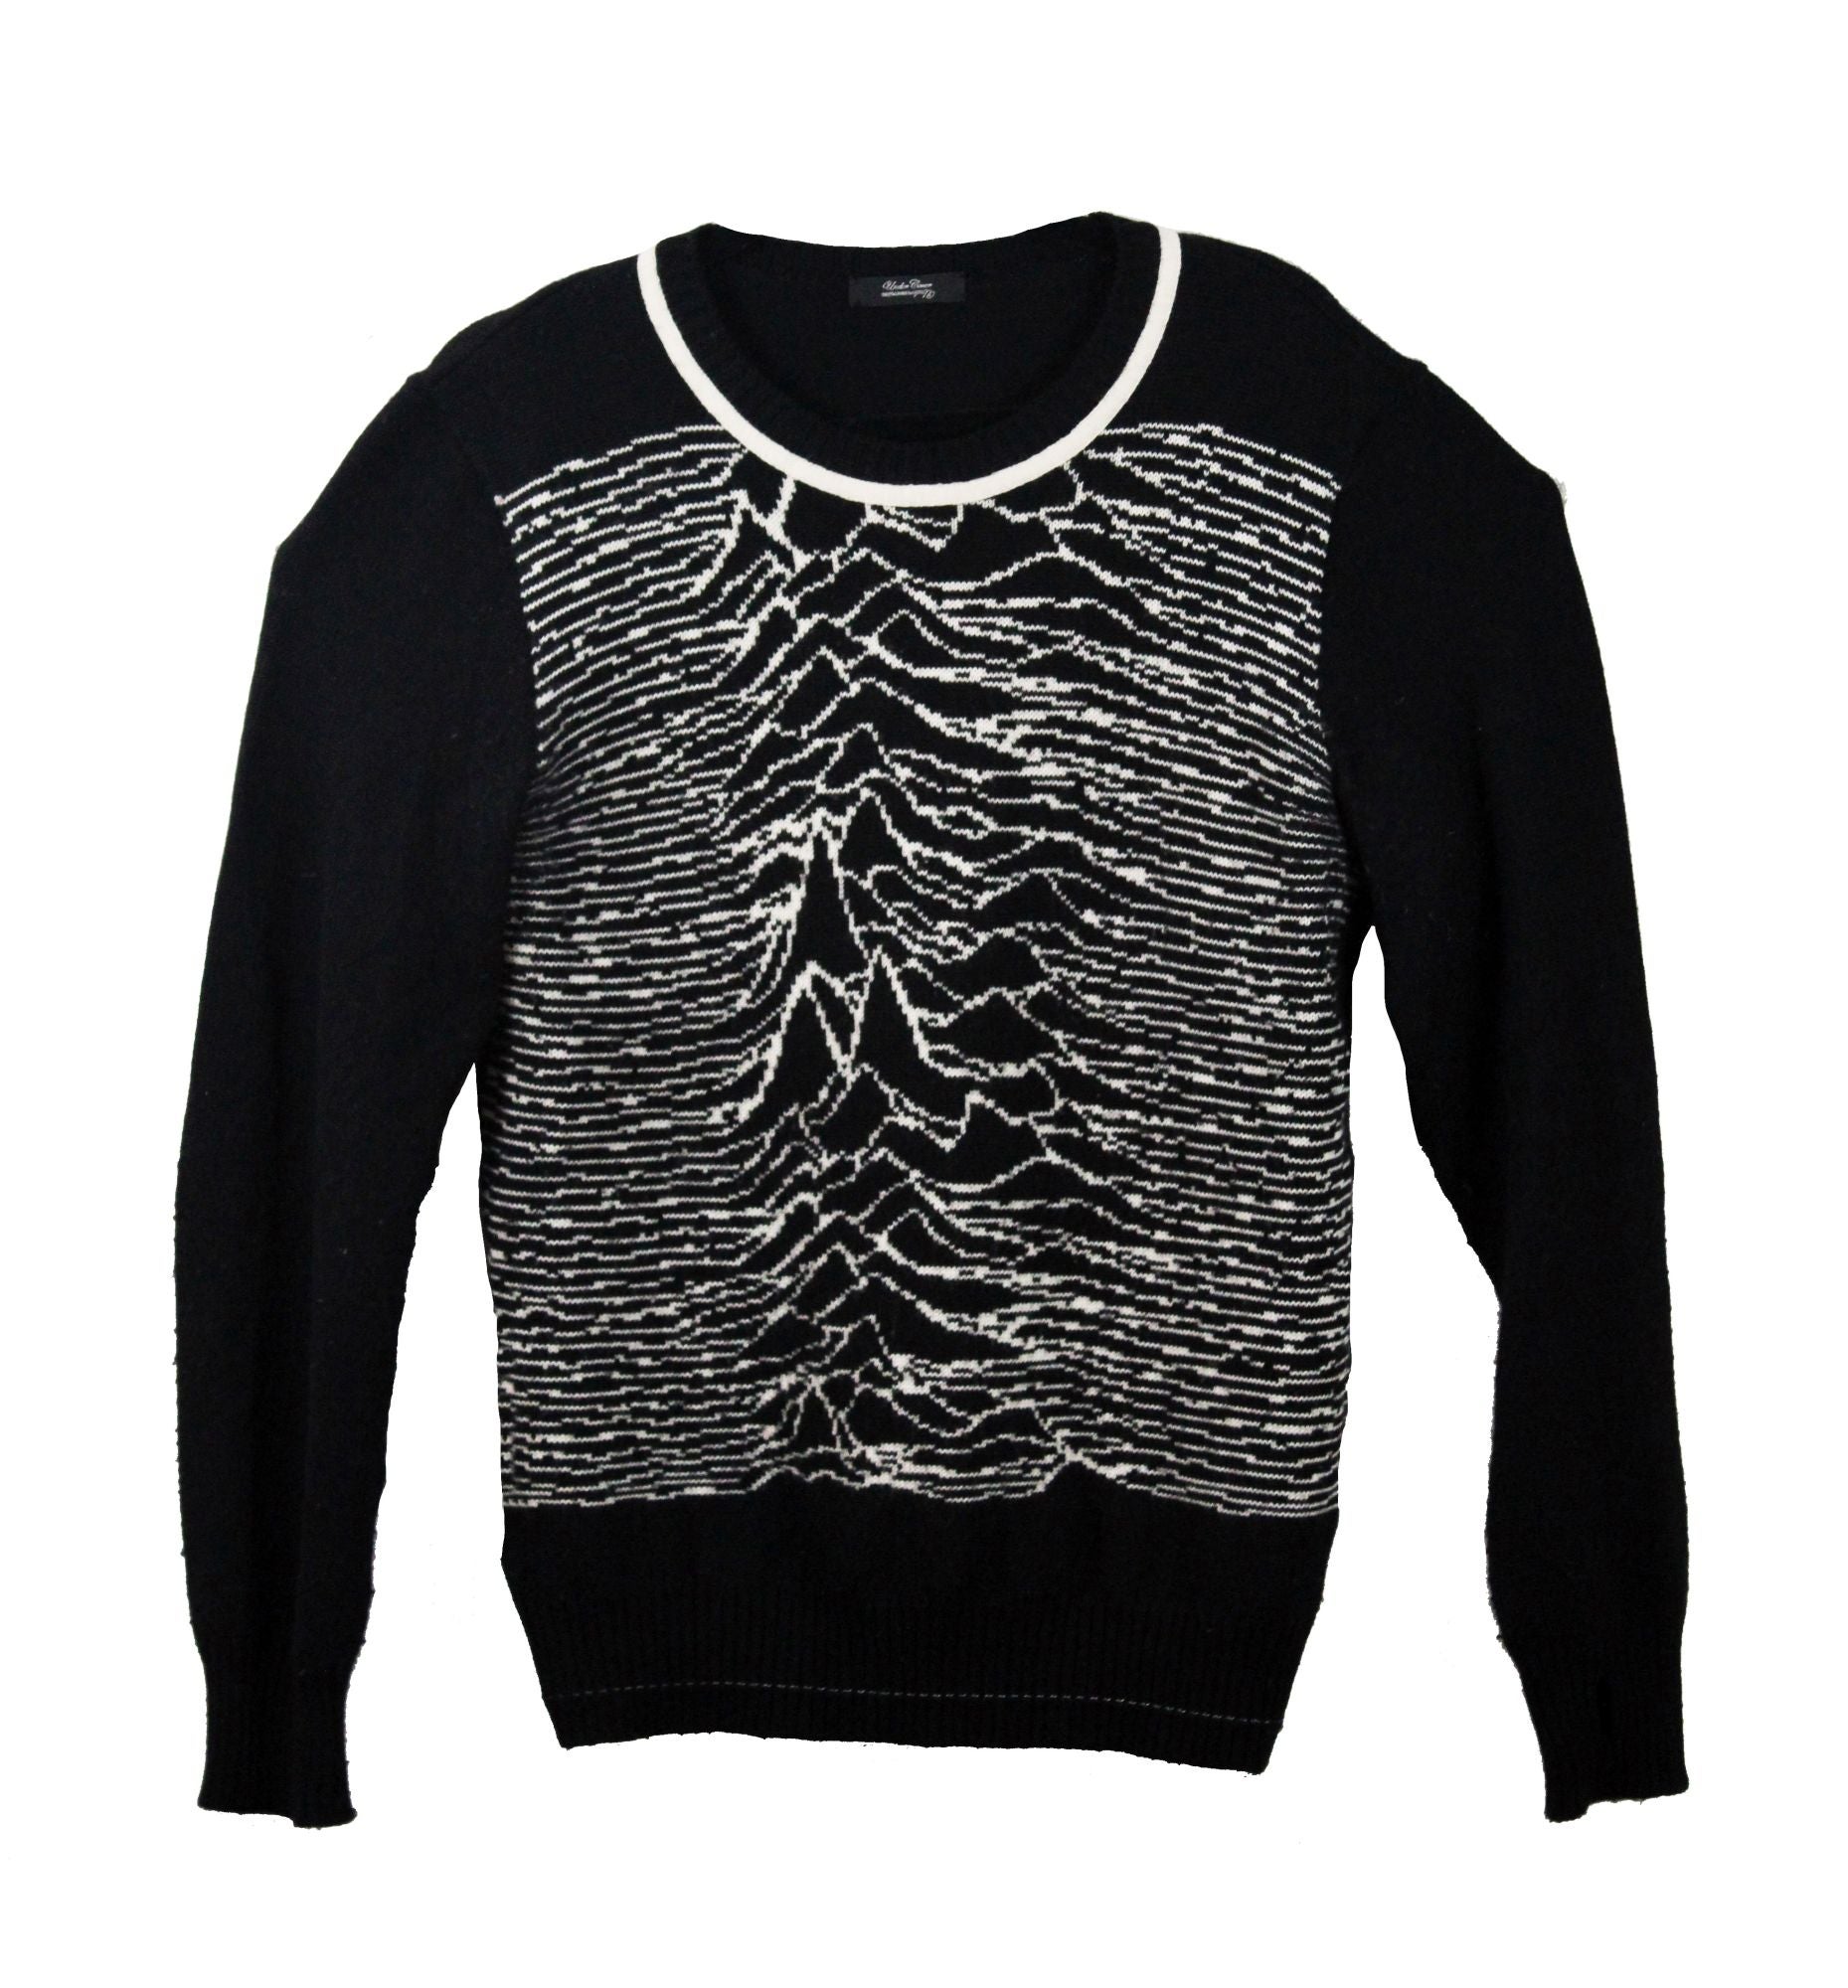 Unknown Pleasures Sweater by Undercover Co